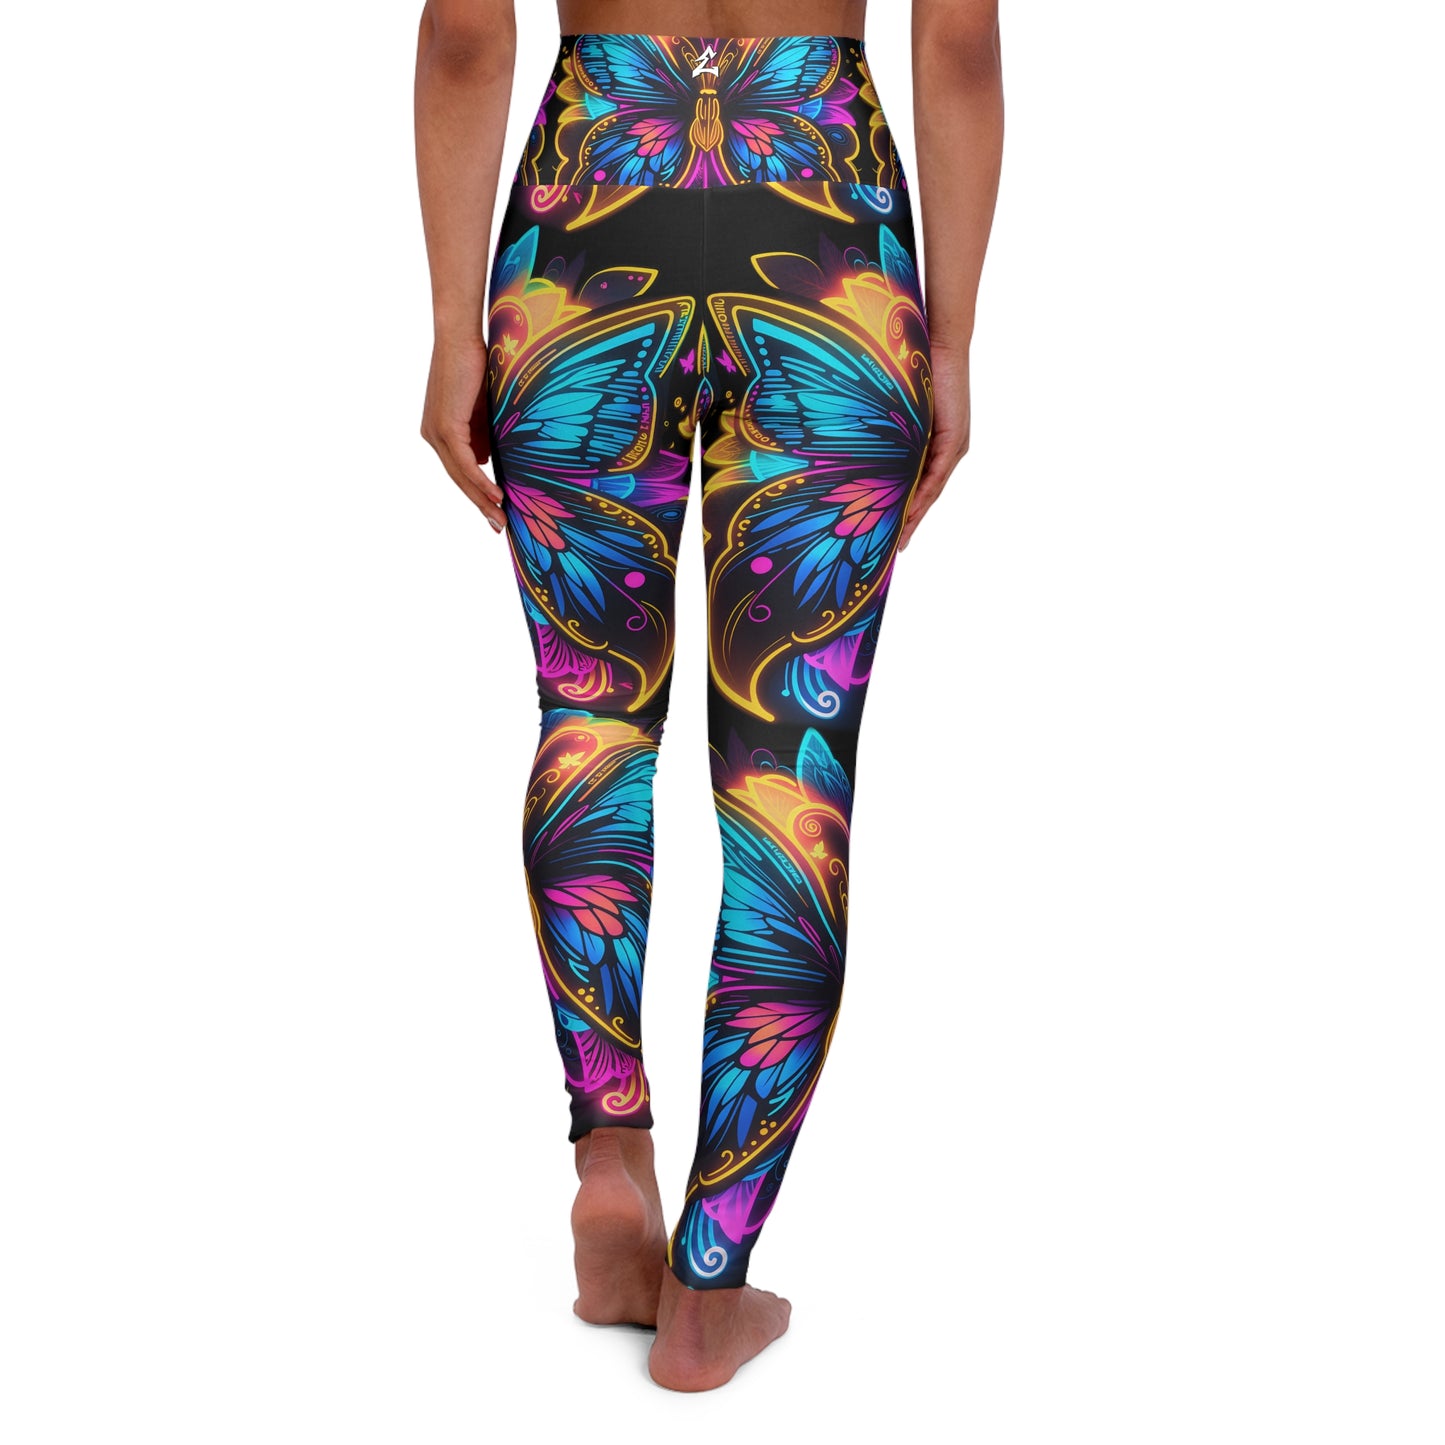 Luminous Flutter: The Neon Electric Butterfly - High Waisted Yoga Leggings